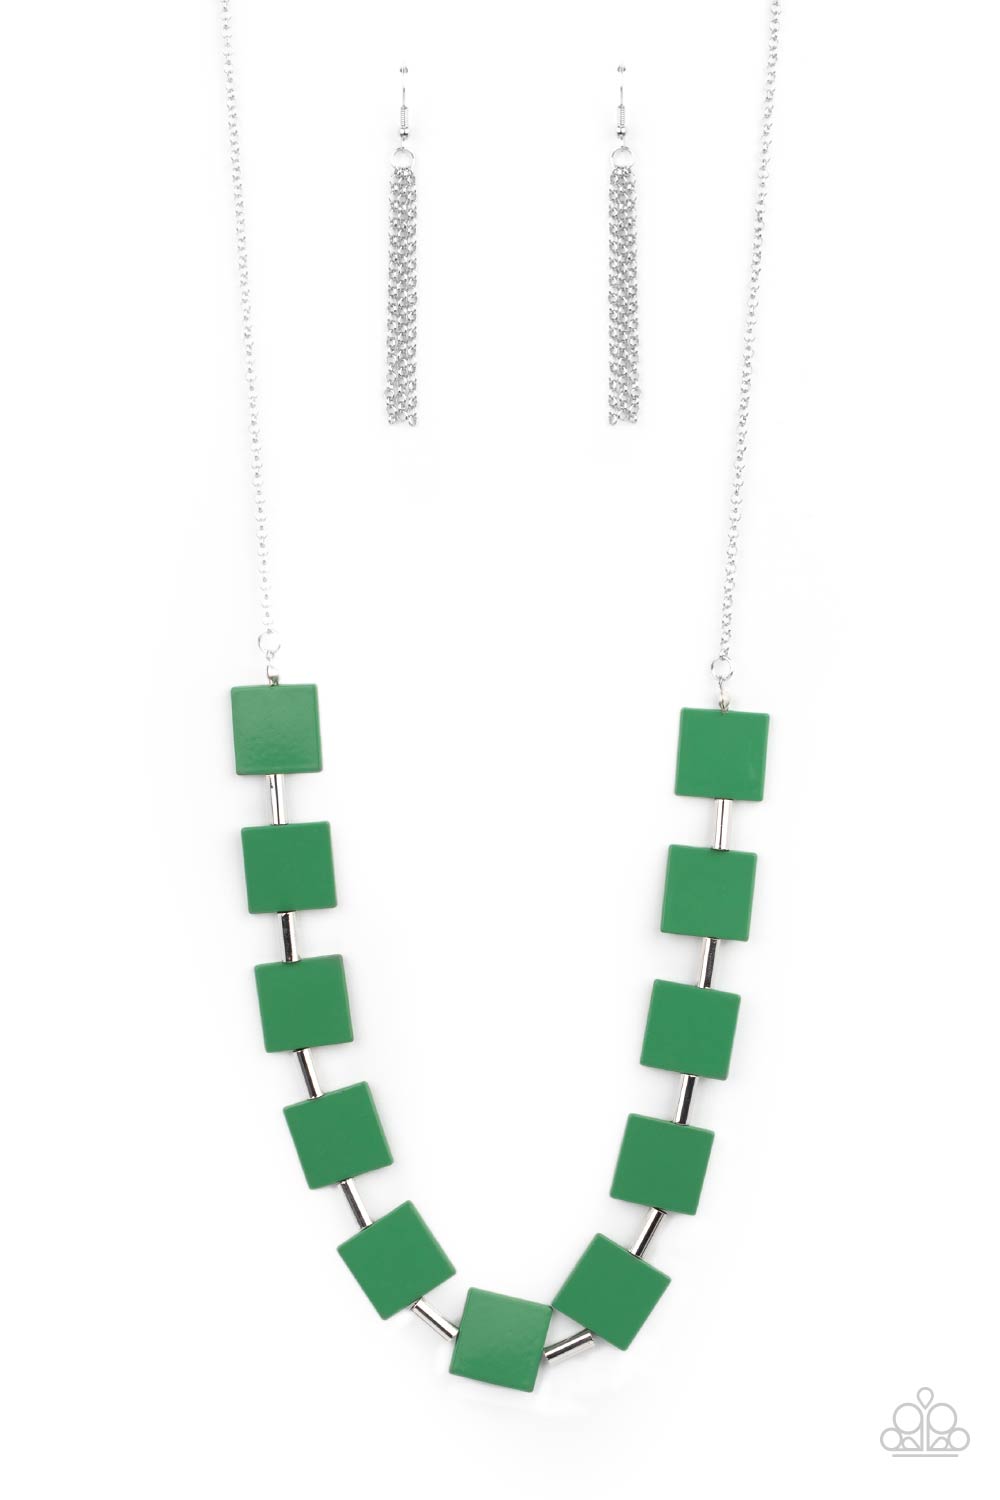 Hello, Material Girl - Green and Silver Necklace - Paparazzi Accessories - Vibrant geometric squares painted in the spring Pantone® of Mint flare out along a long silver chain as it drapes along the chest. Sleek silver cylinders separate the square plates, adding cool metallic accents to this stylish fashion necklace.